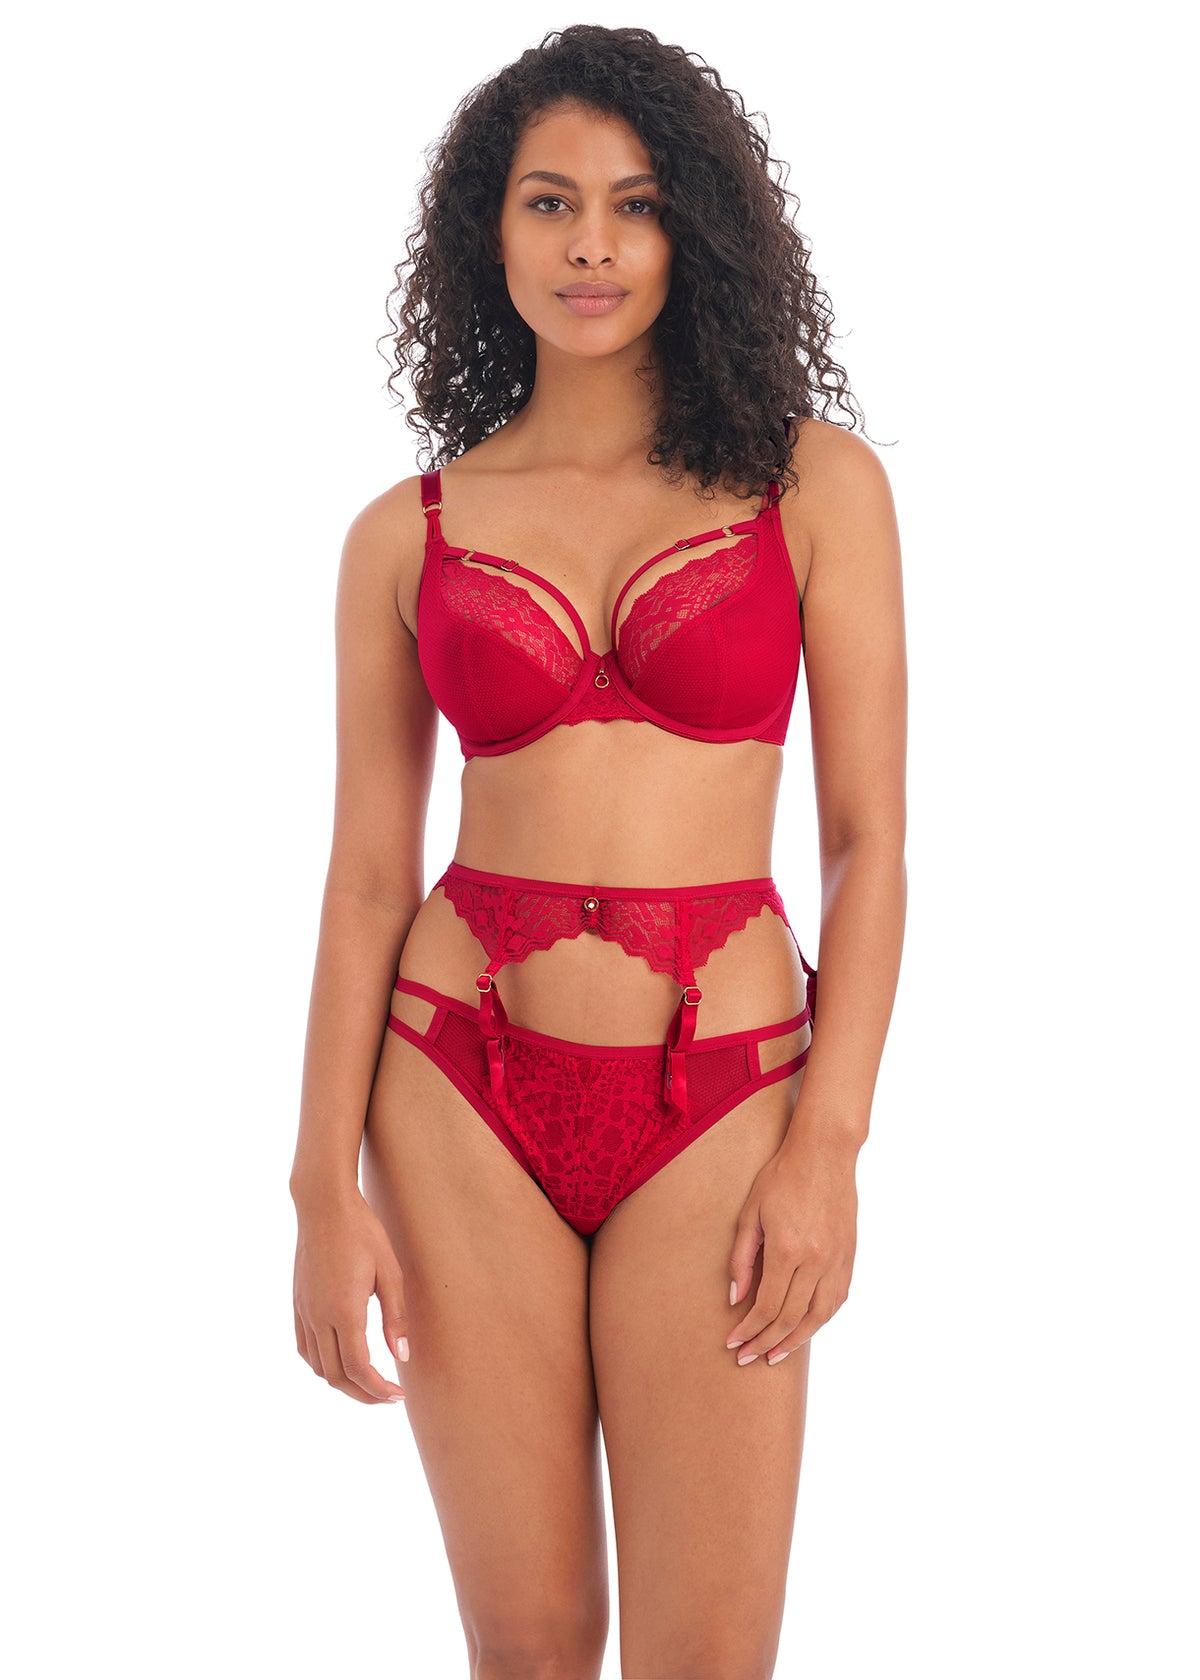 Temptress Underwired Moulded Plunge T-Shirt Bra - Cherry – Leia